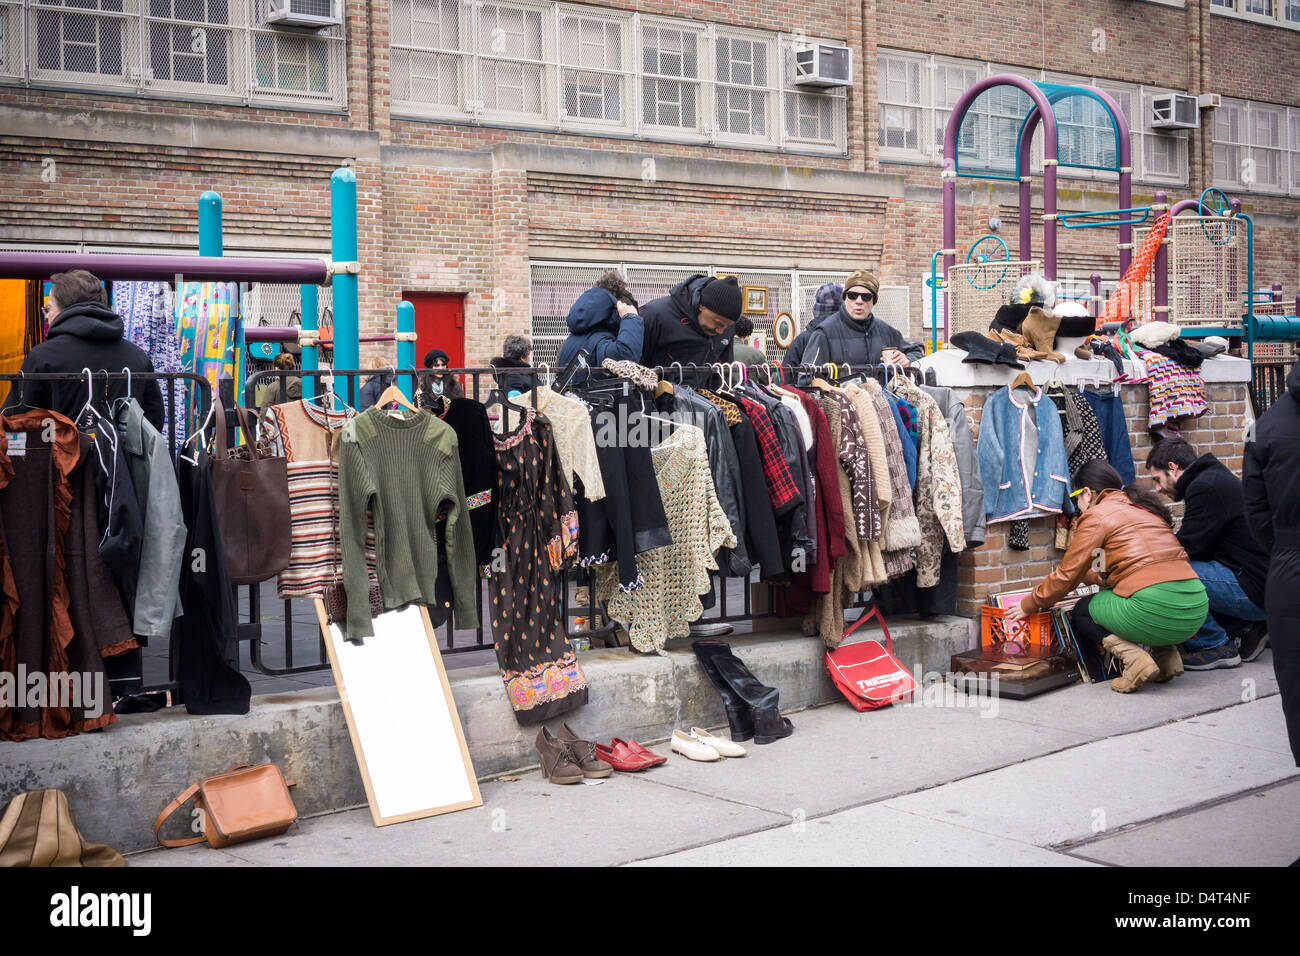 Shoppers search for bargains at a flea market in the Park Slope neighborhood of Brooklyn in New York Stock Photo